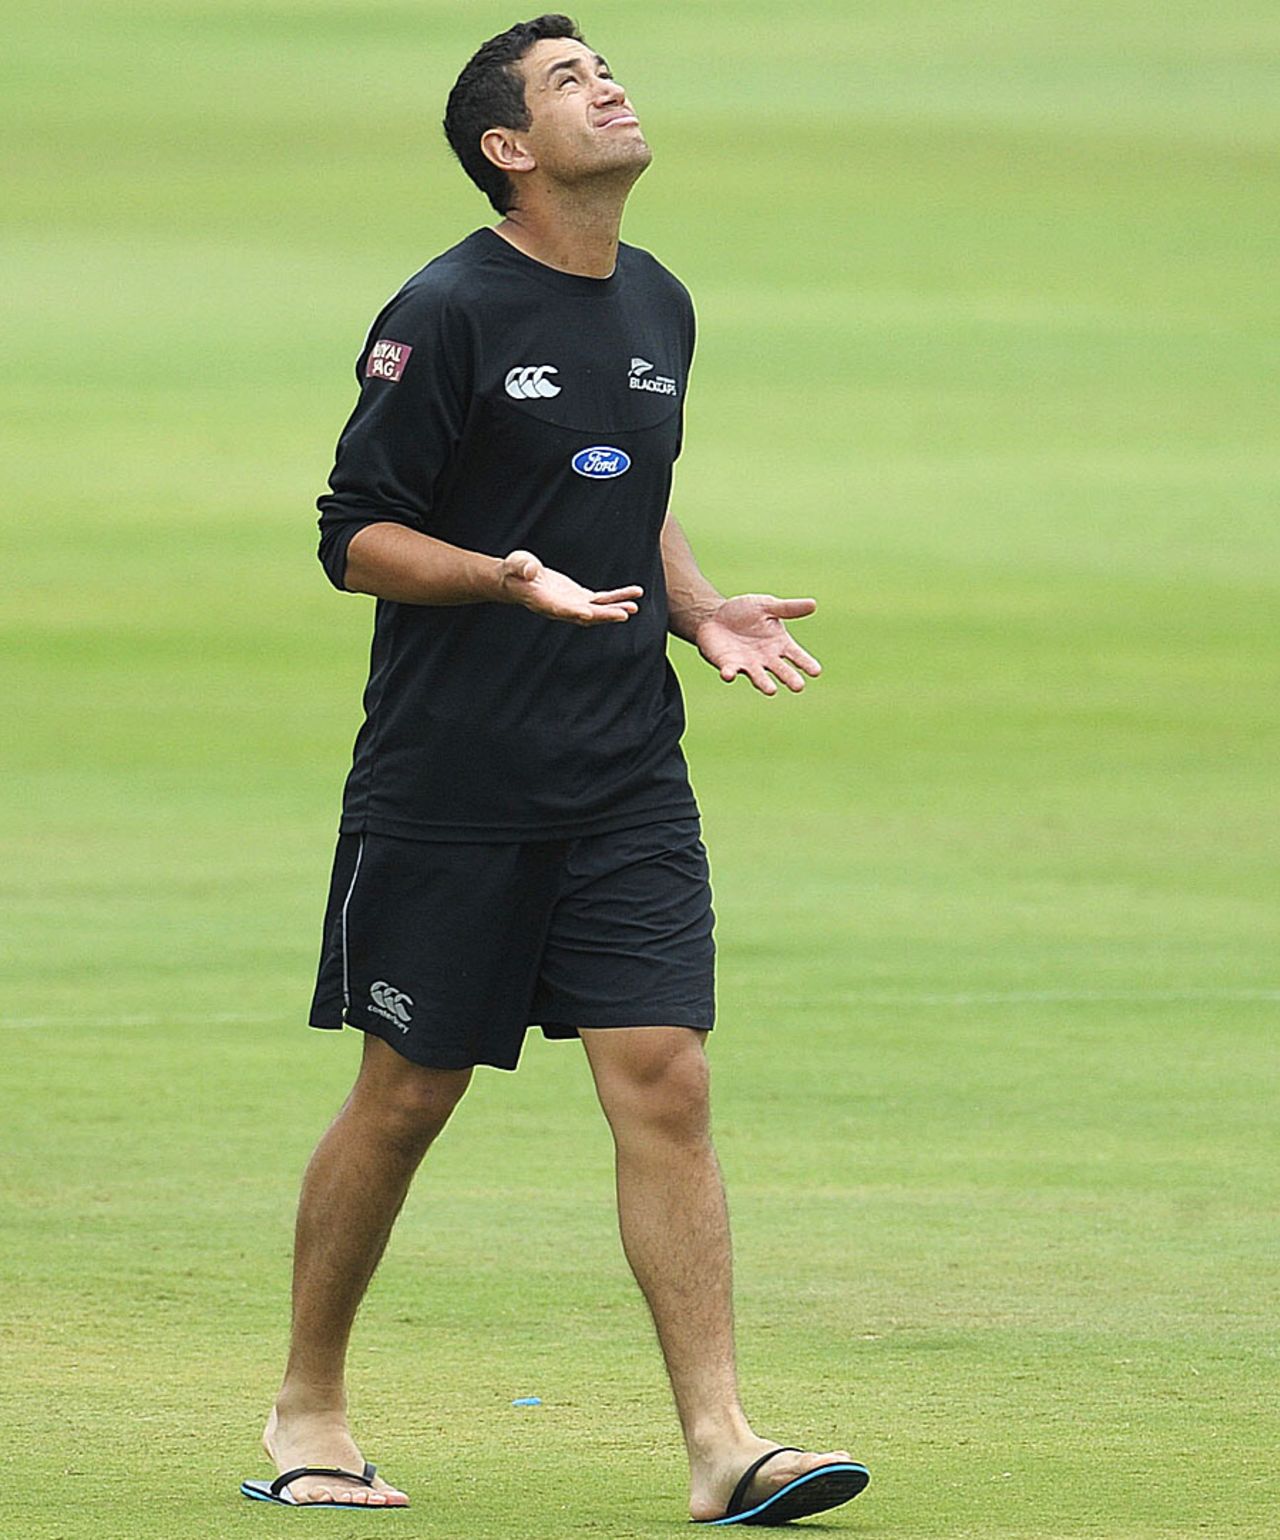 Ross Taylor looks at the heavens, India v New Zealand, 1st Test, Hyderabad, 4th day, August 26, 2012